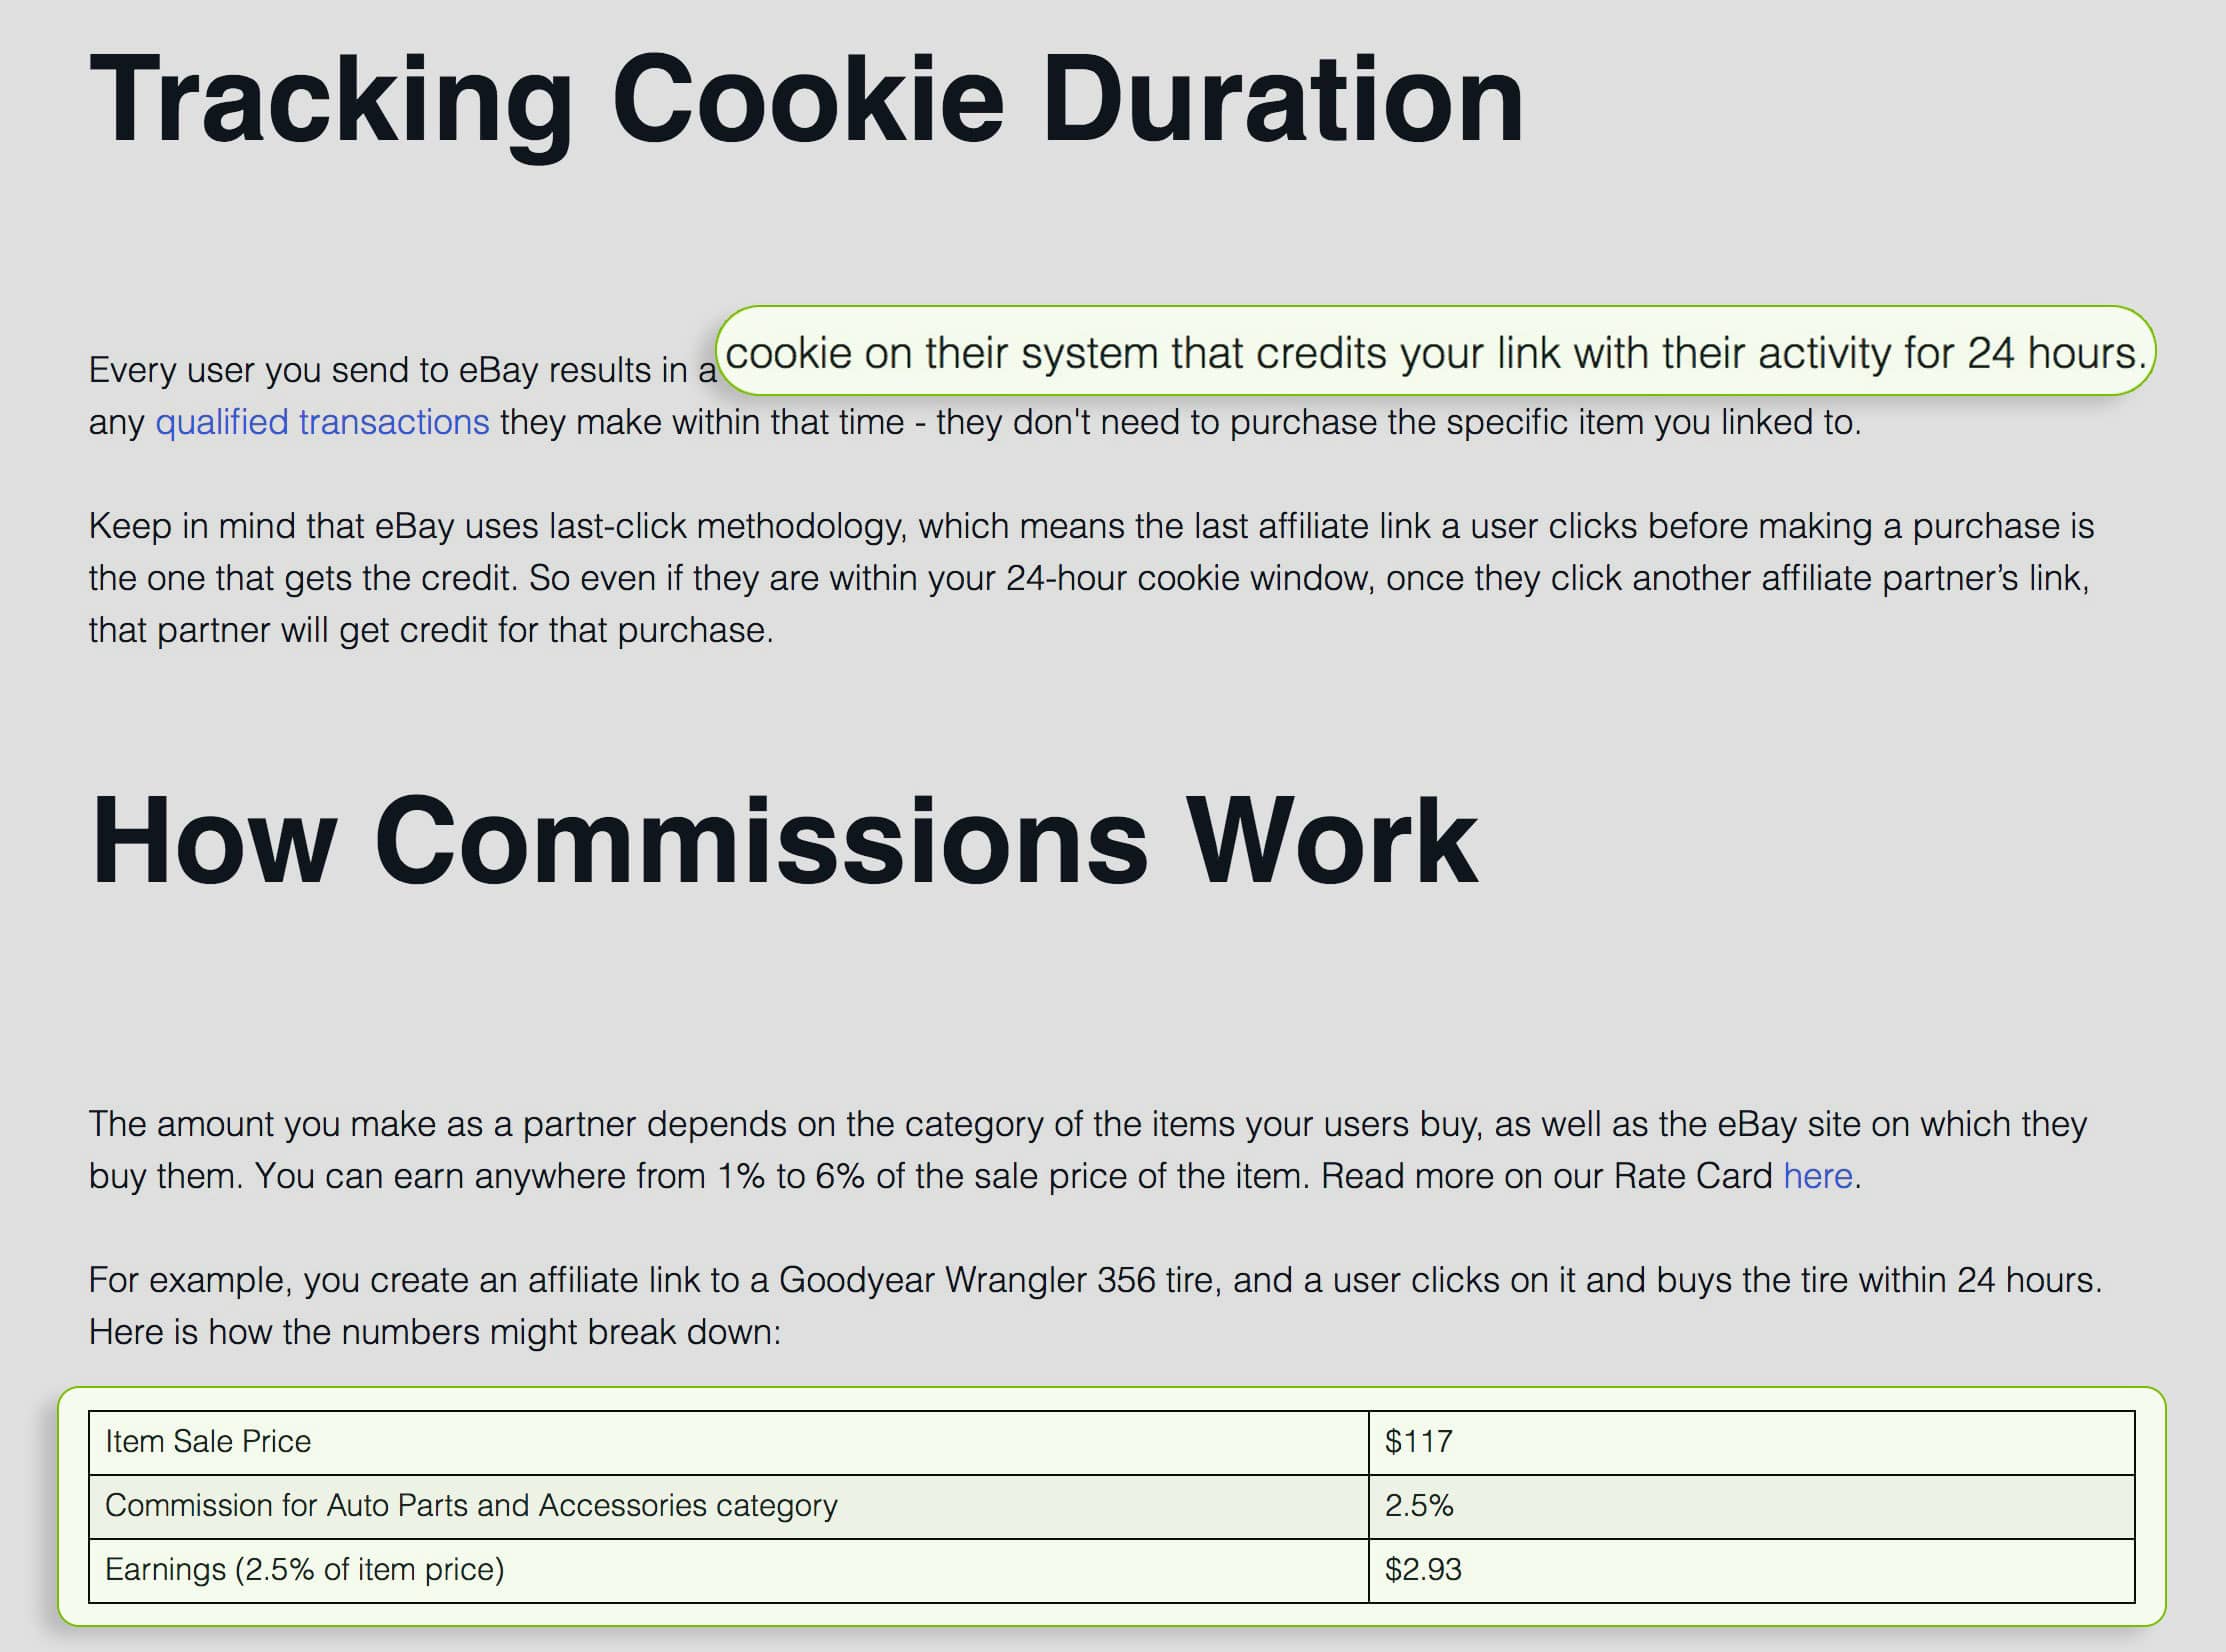 ebay cookie and commission policy